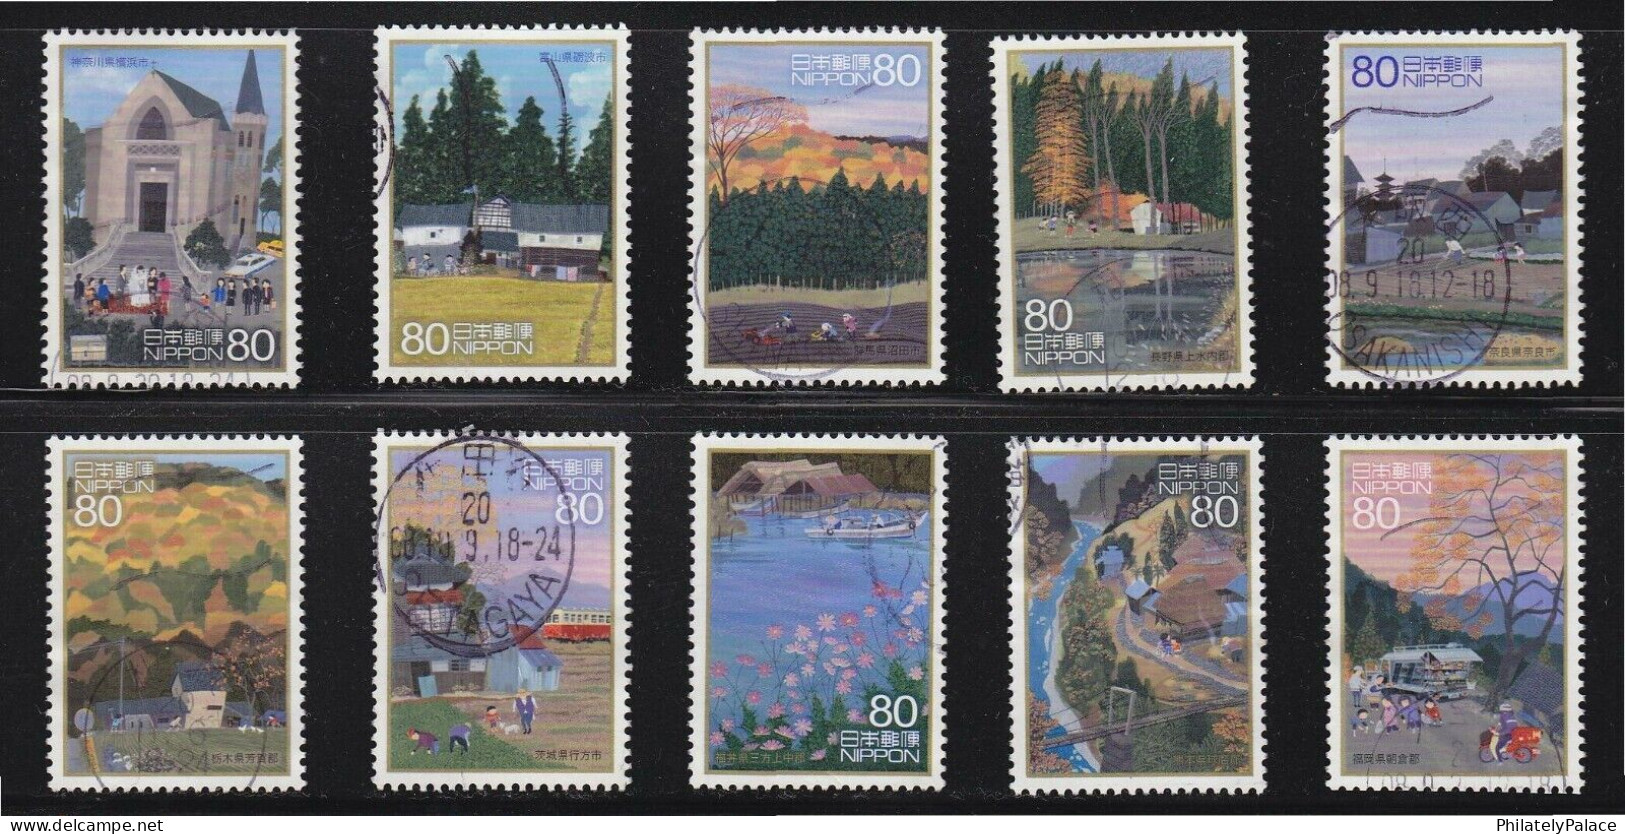 JAPAN 2008 (PREFECTURE) HOMETOWNS SCENES IN MY HEART (SUMMER) S1 10 STAMPS USED (**) - Oblitérés